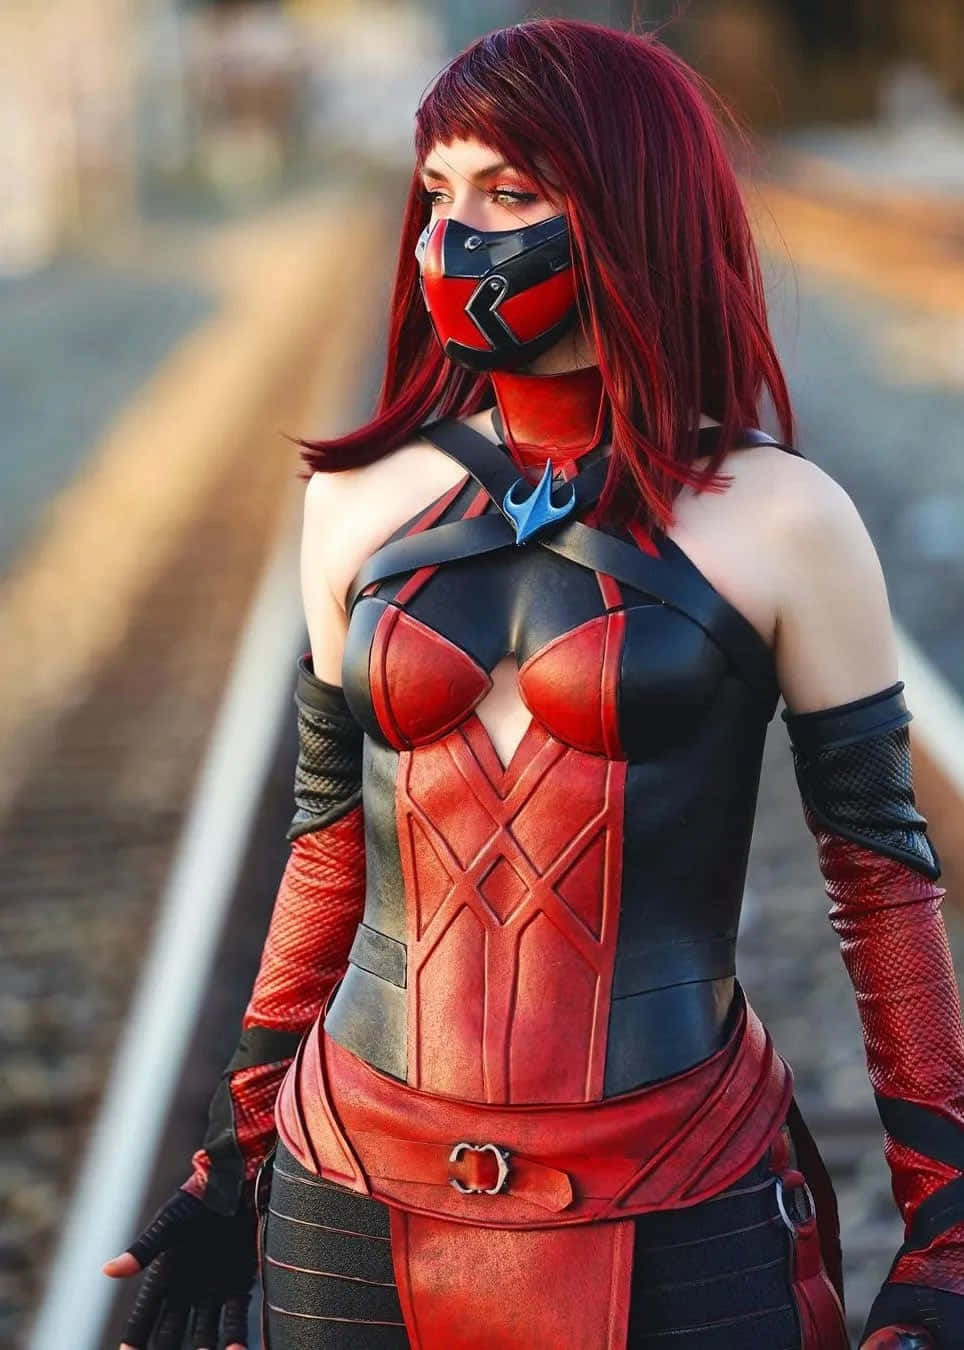 High-quality Mortal Kombat cosplayers in action Wallpaper